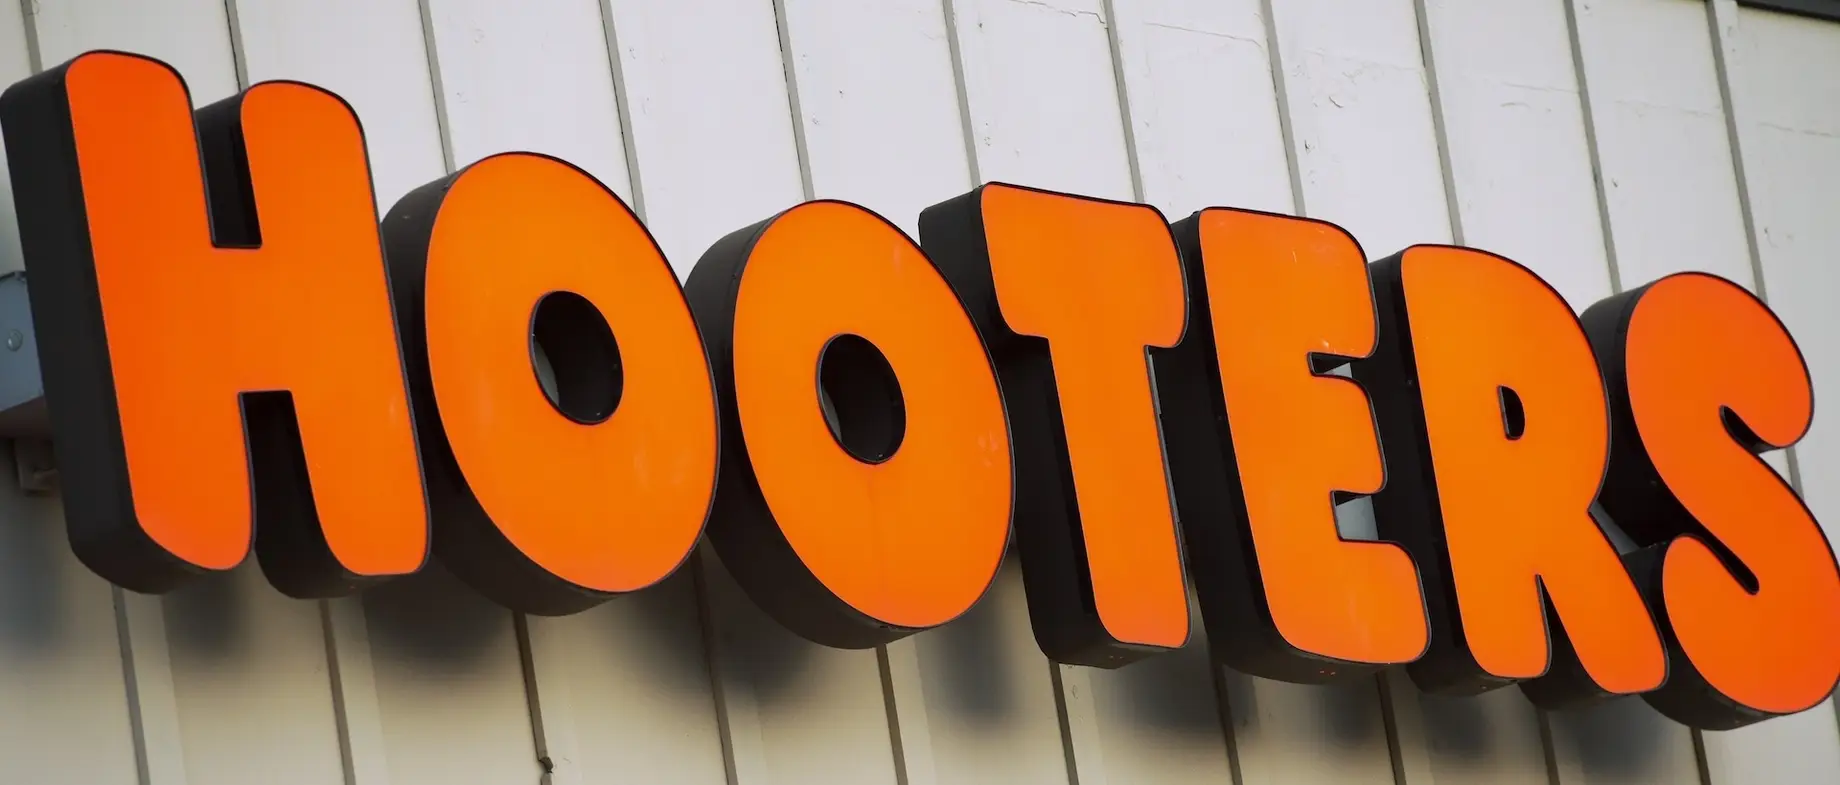 Say What Now? West Virginia Town Holds Candlelight Vigil for Closing of Local Hooters